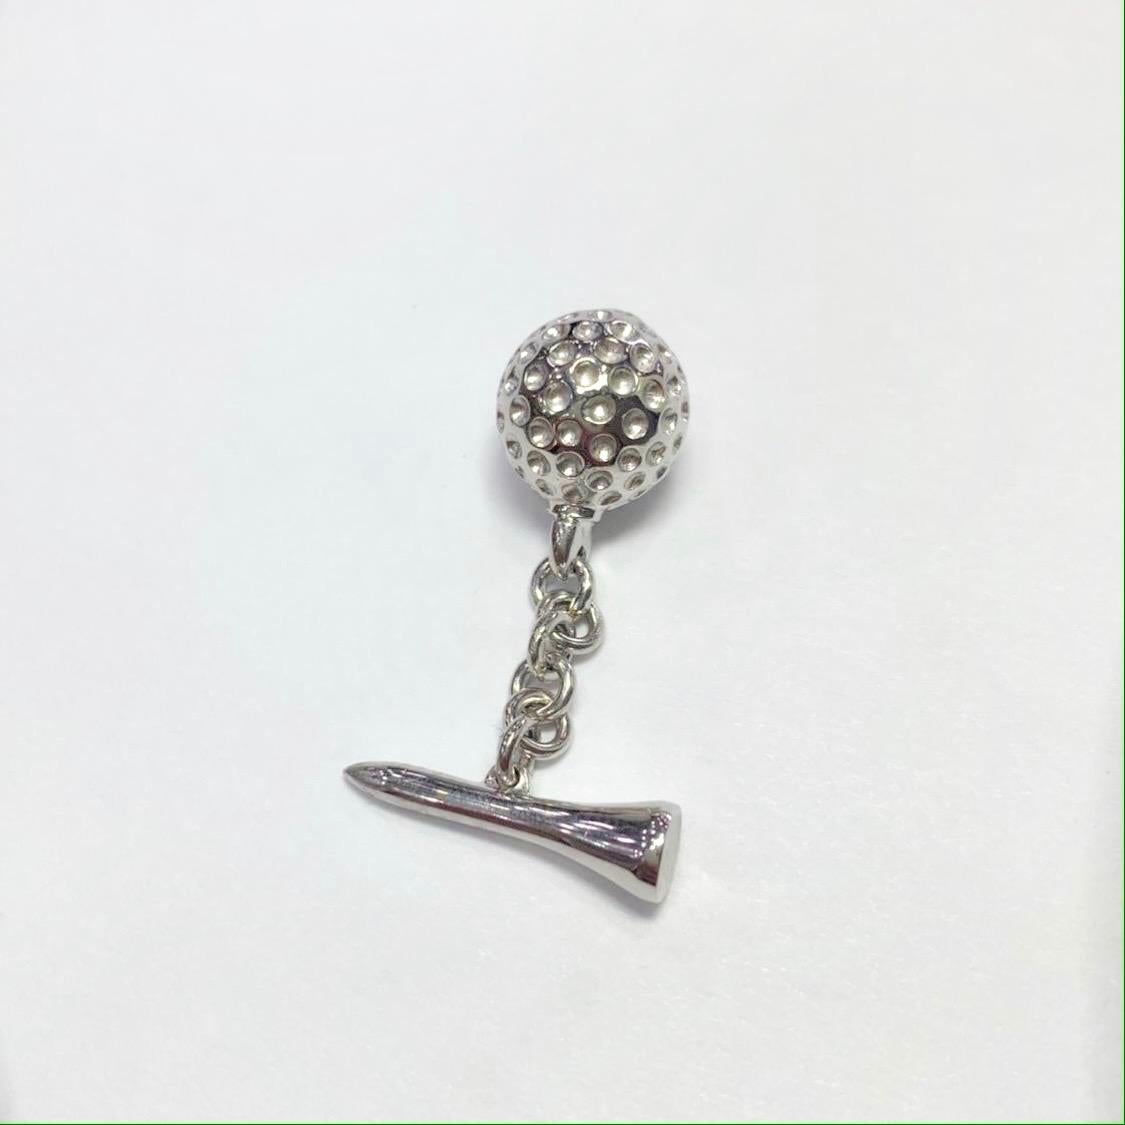 Great Quality Solid Silver Golf Ball and Tee Chain Cufflinks. English made. 

Approx total length : 33mm
Weight : 19.7g